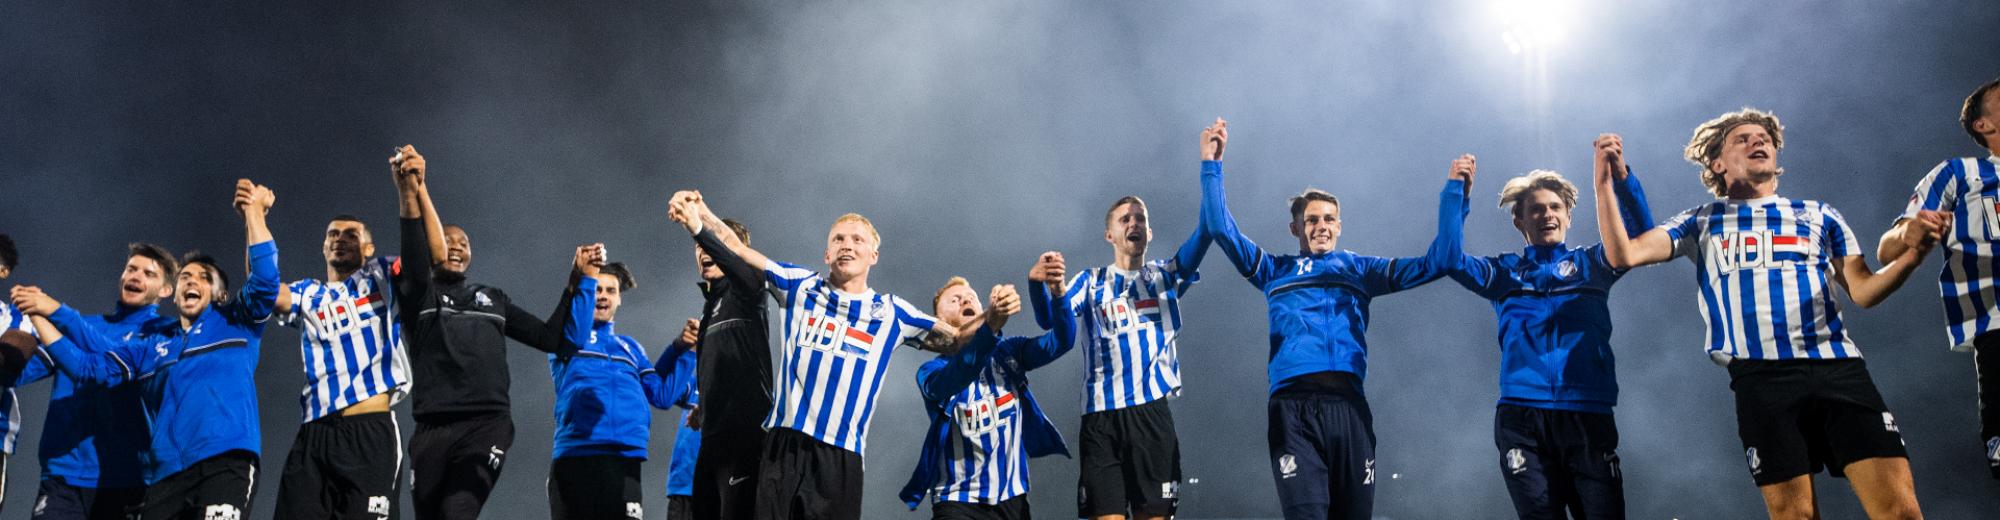 Cheering FC Eindhoven soccer players | Seacon Blue | Seacon Logistics